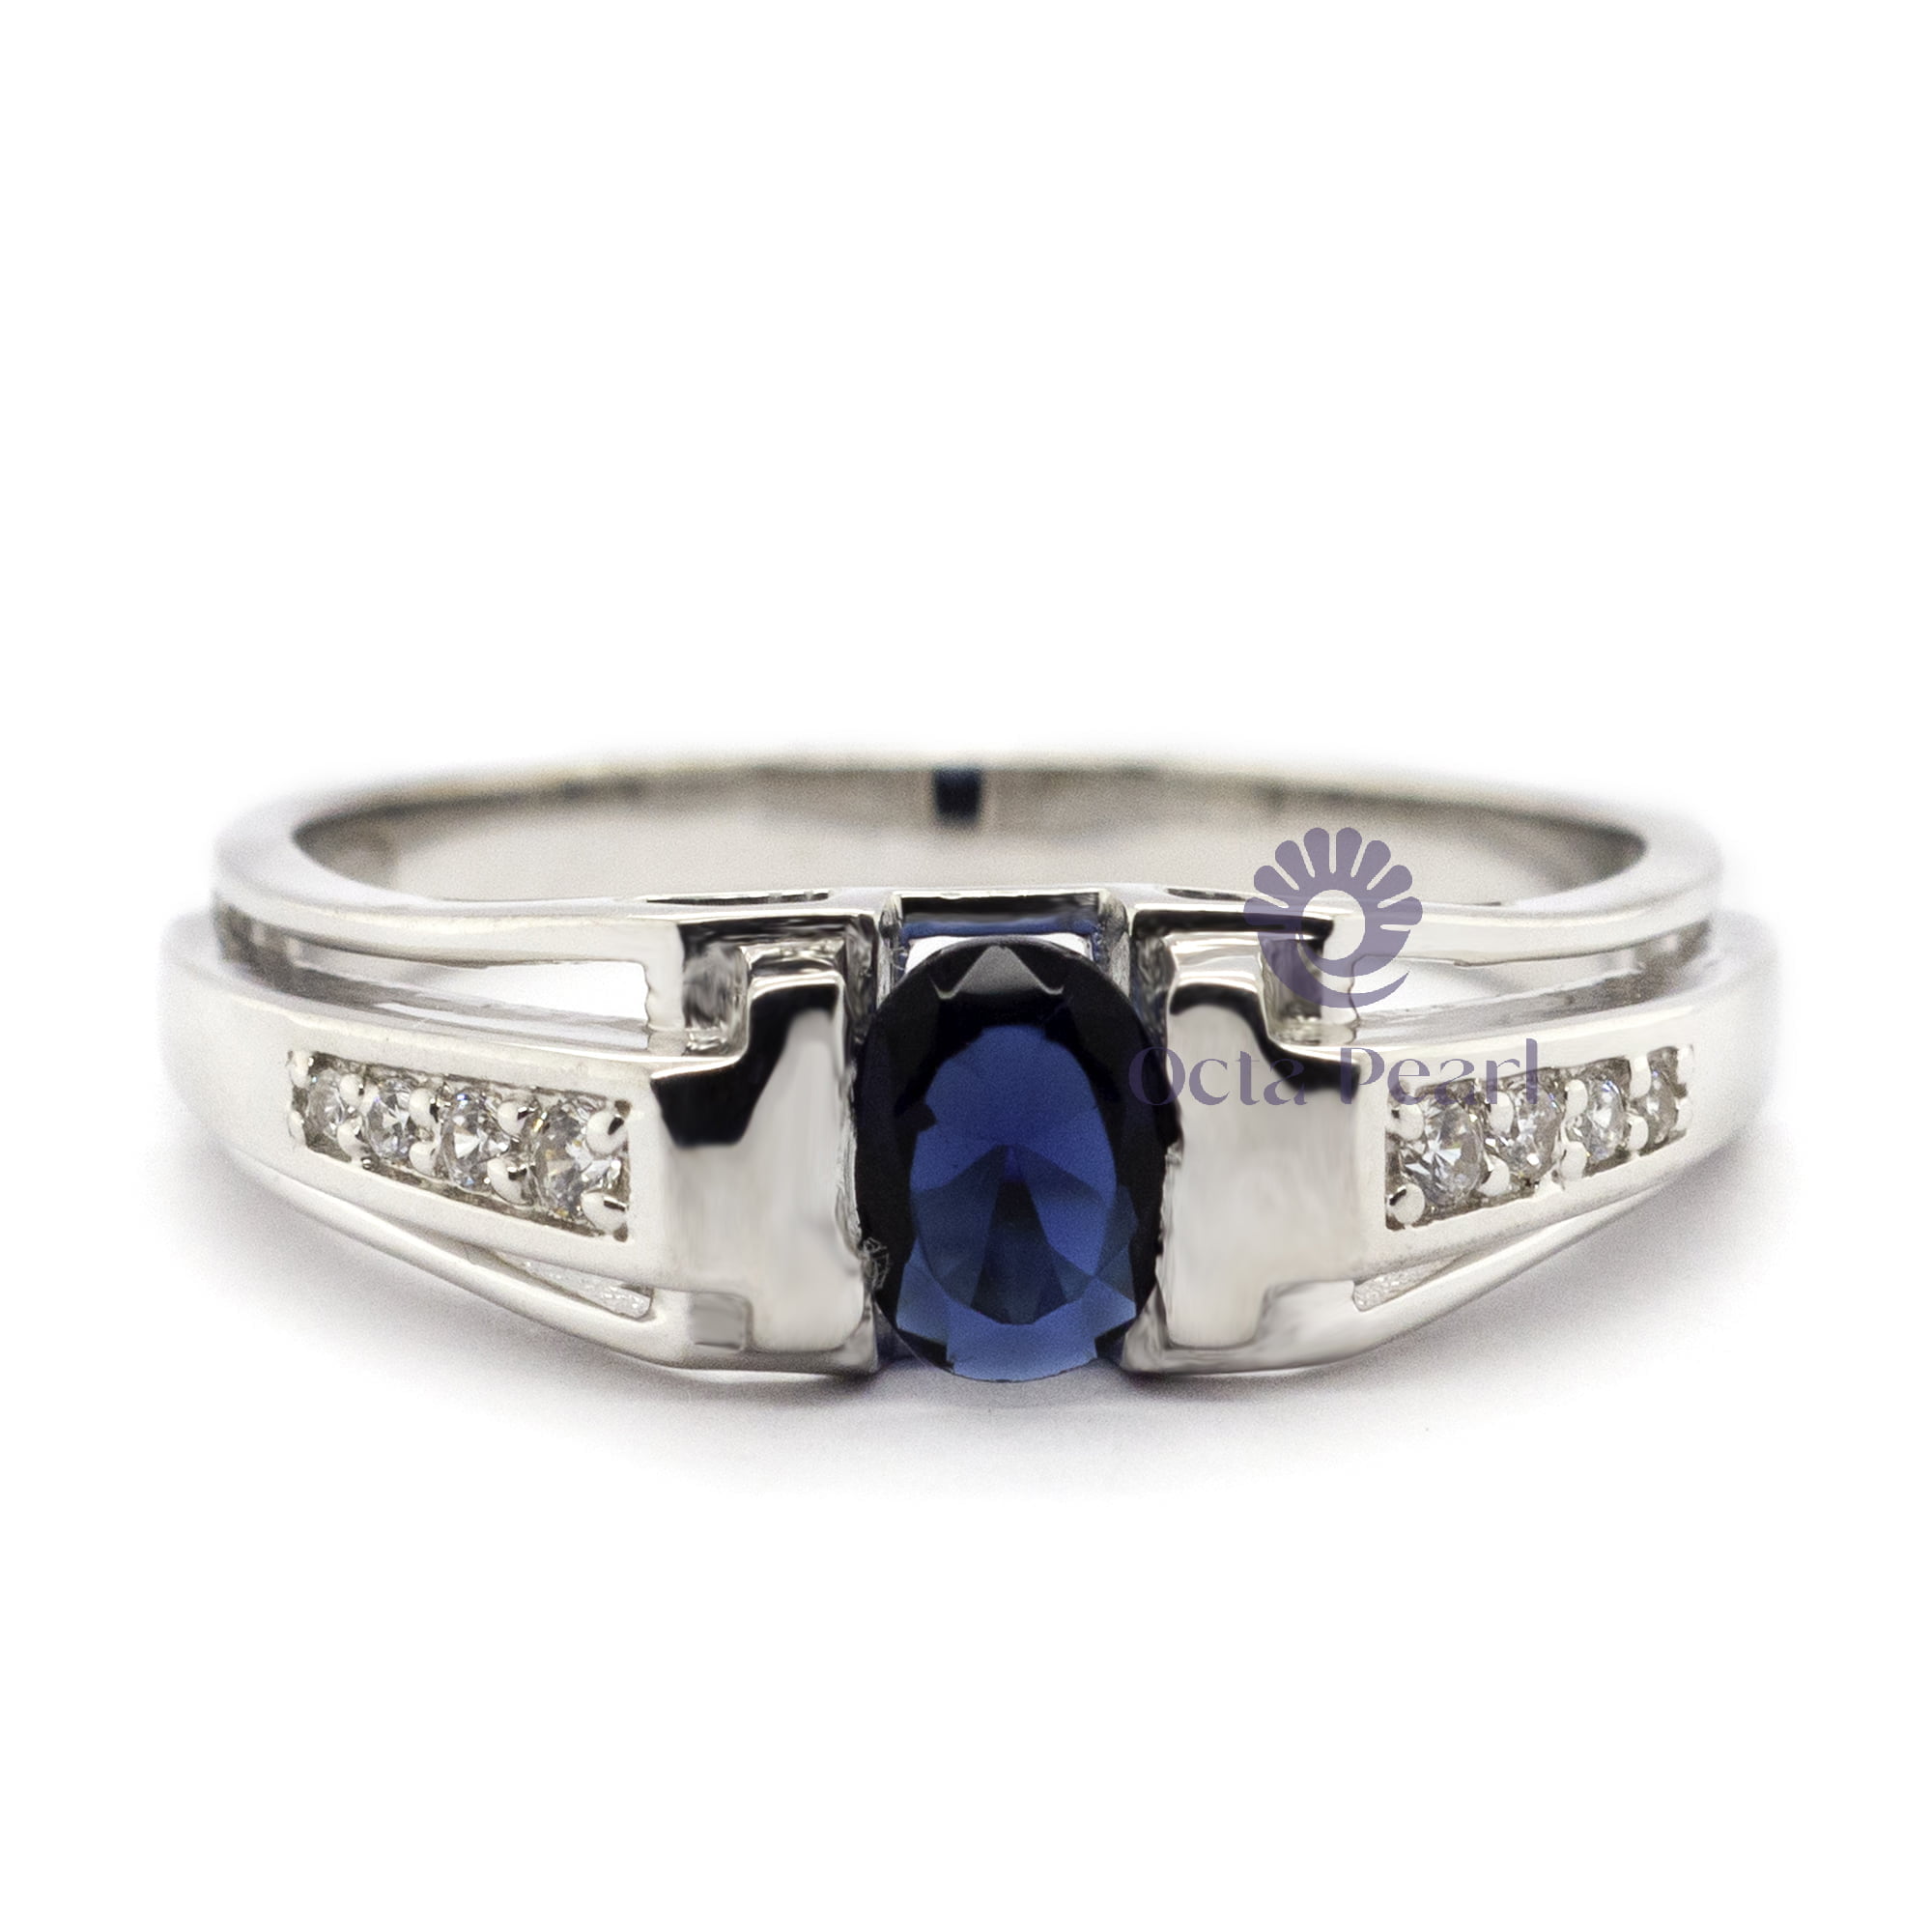 6.30X5.30 MM Tension Set Blue Sapphire Oval With CZ Round Stone Men's Ring Father's Day Gift